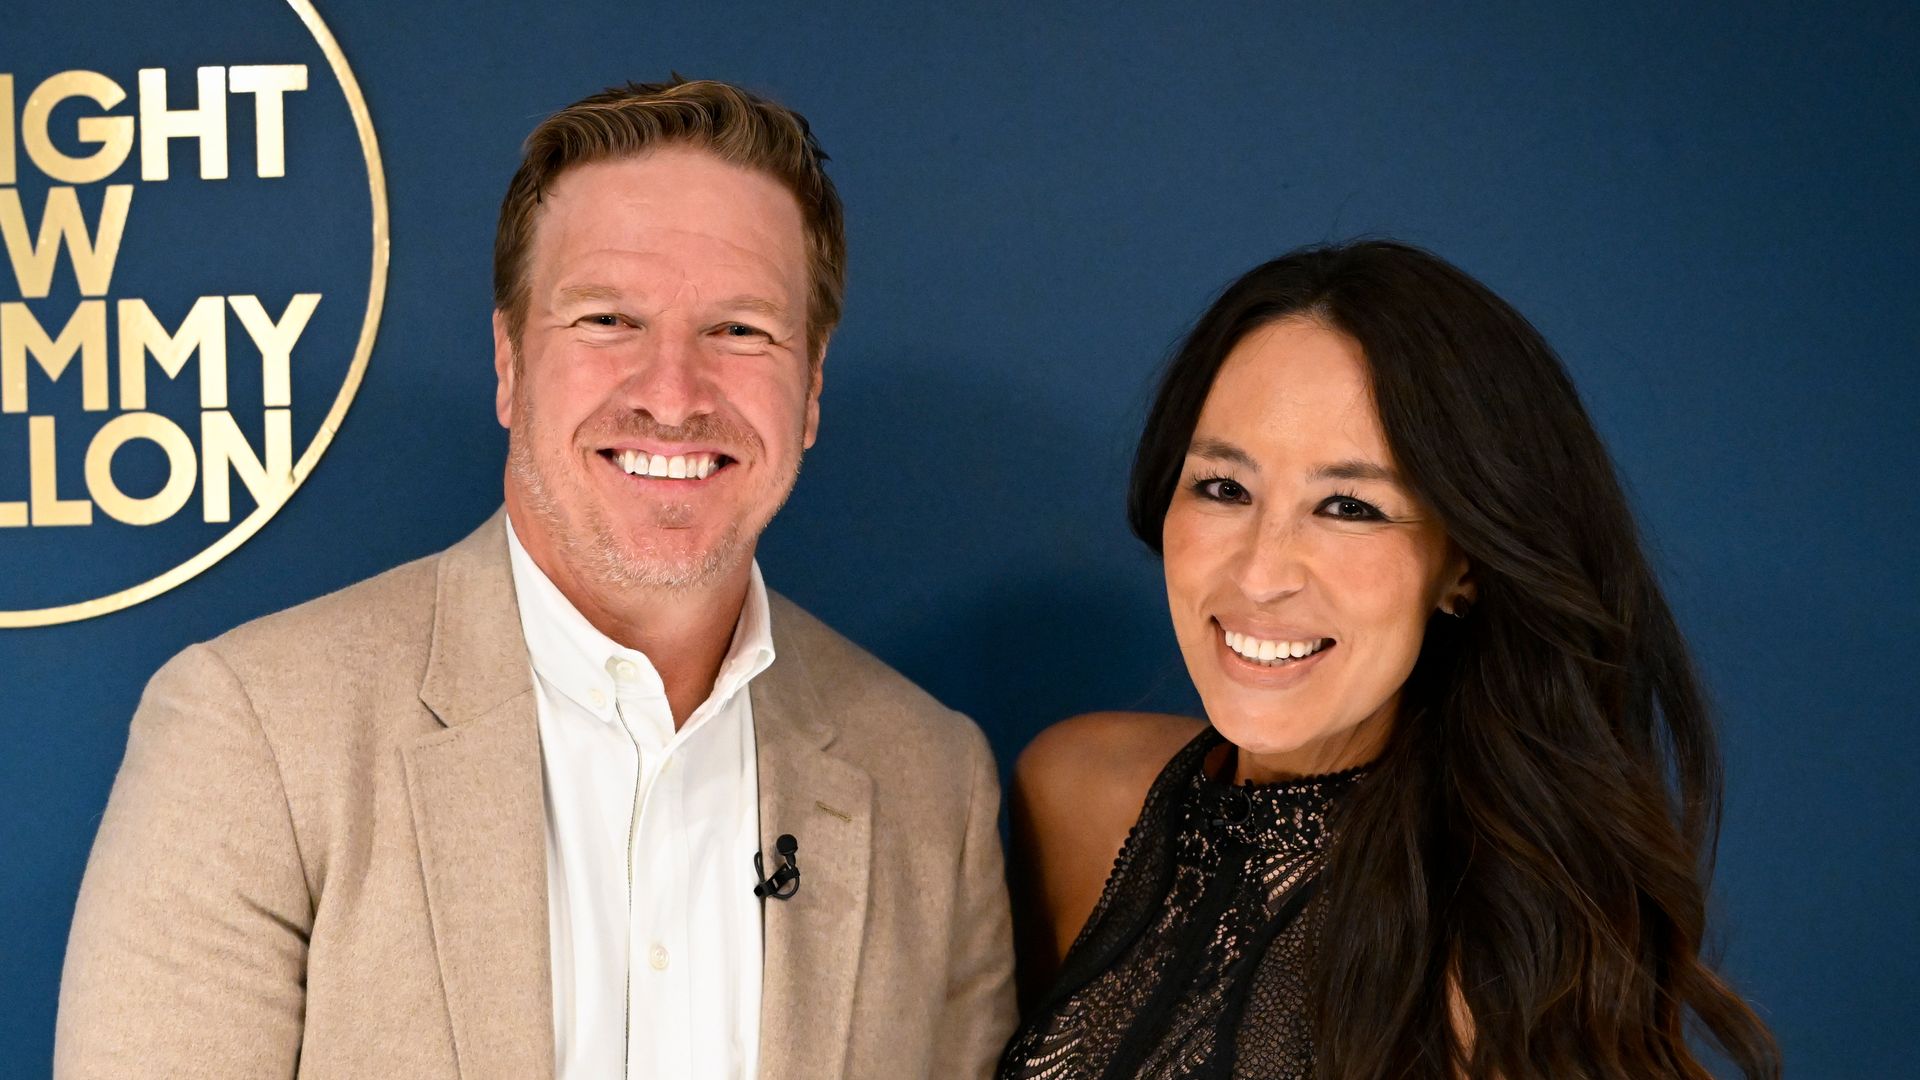 Chip and Joanna Gaines on The Tonight Show